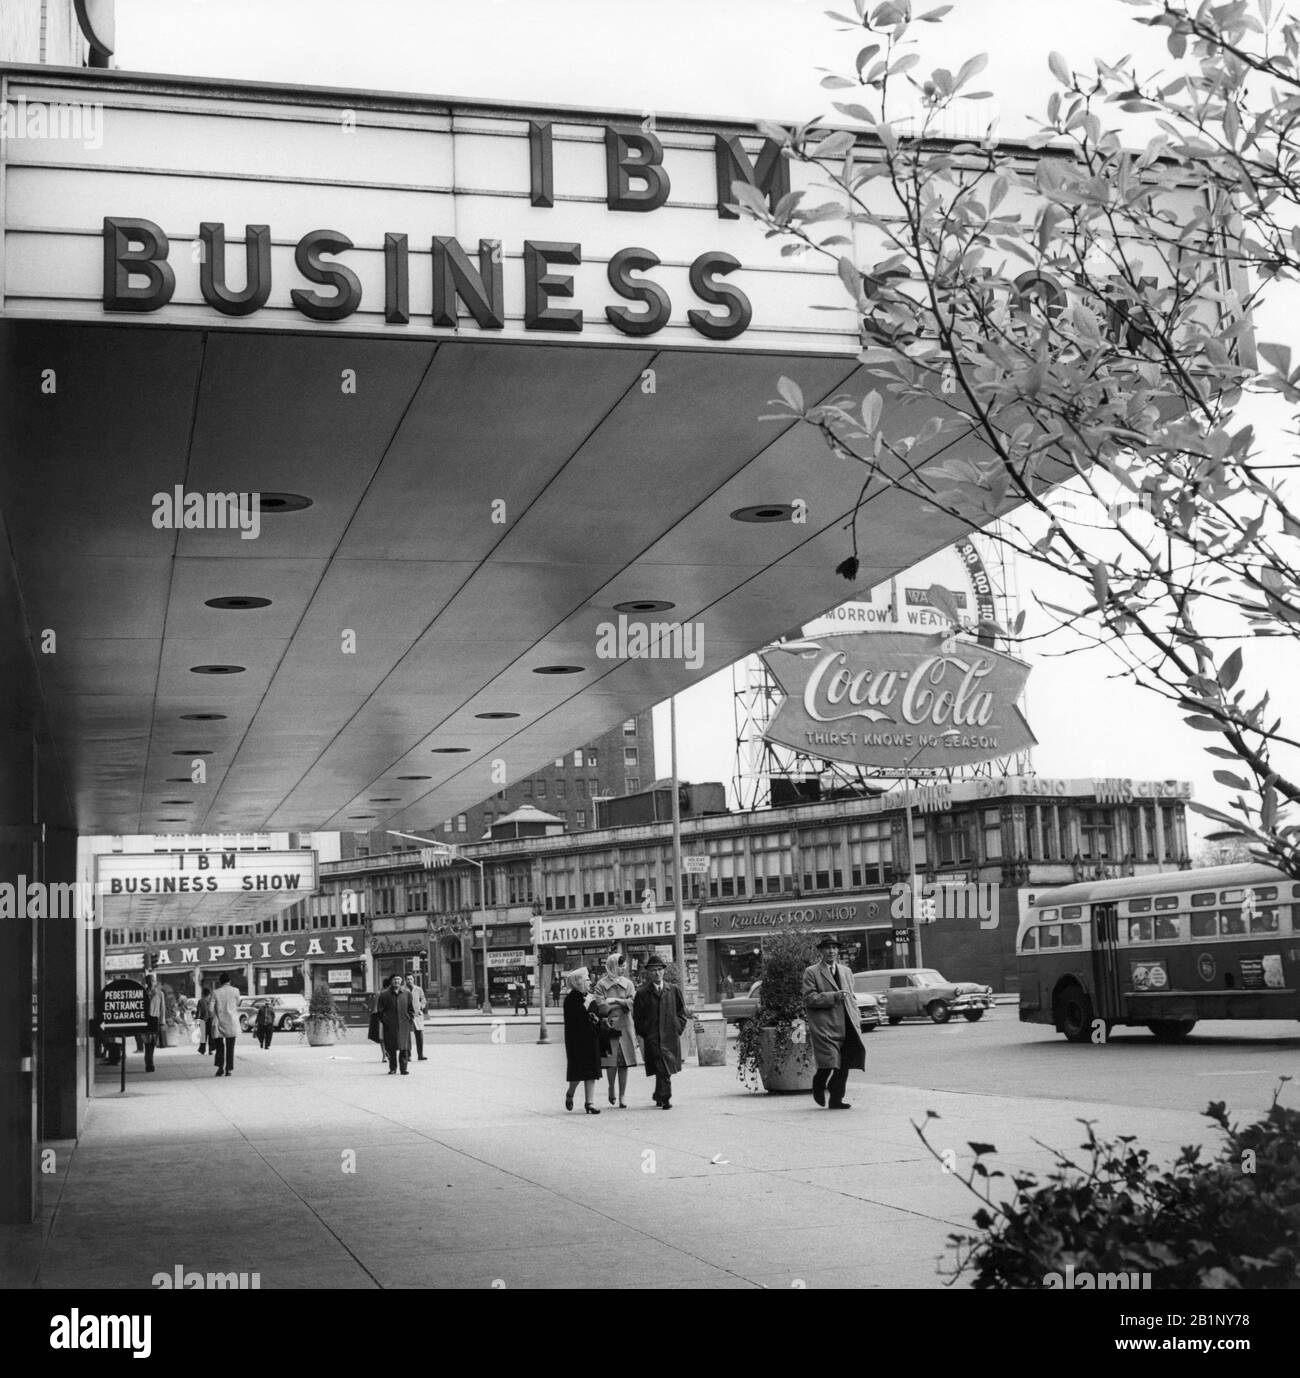 IBM Business Show at the New York Coliseum on Columbus Circle in New York City, coinciding with the April 30, 1963 IBM Stockholder's Annual Meeting. Stock Photo